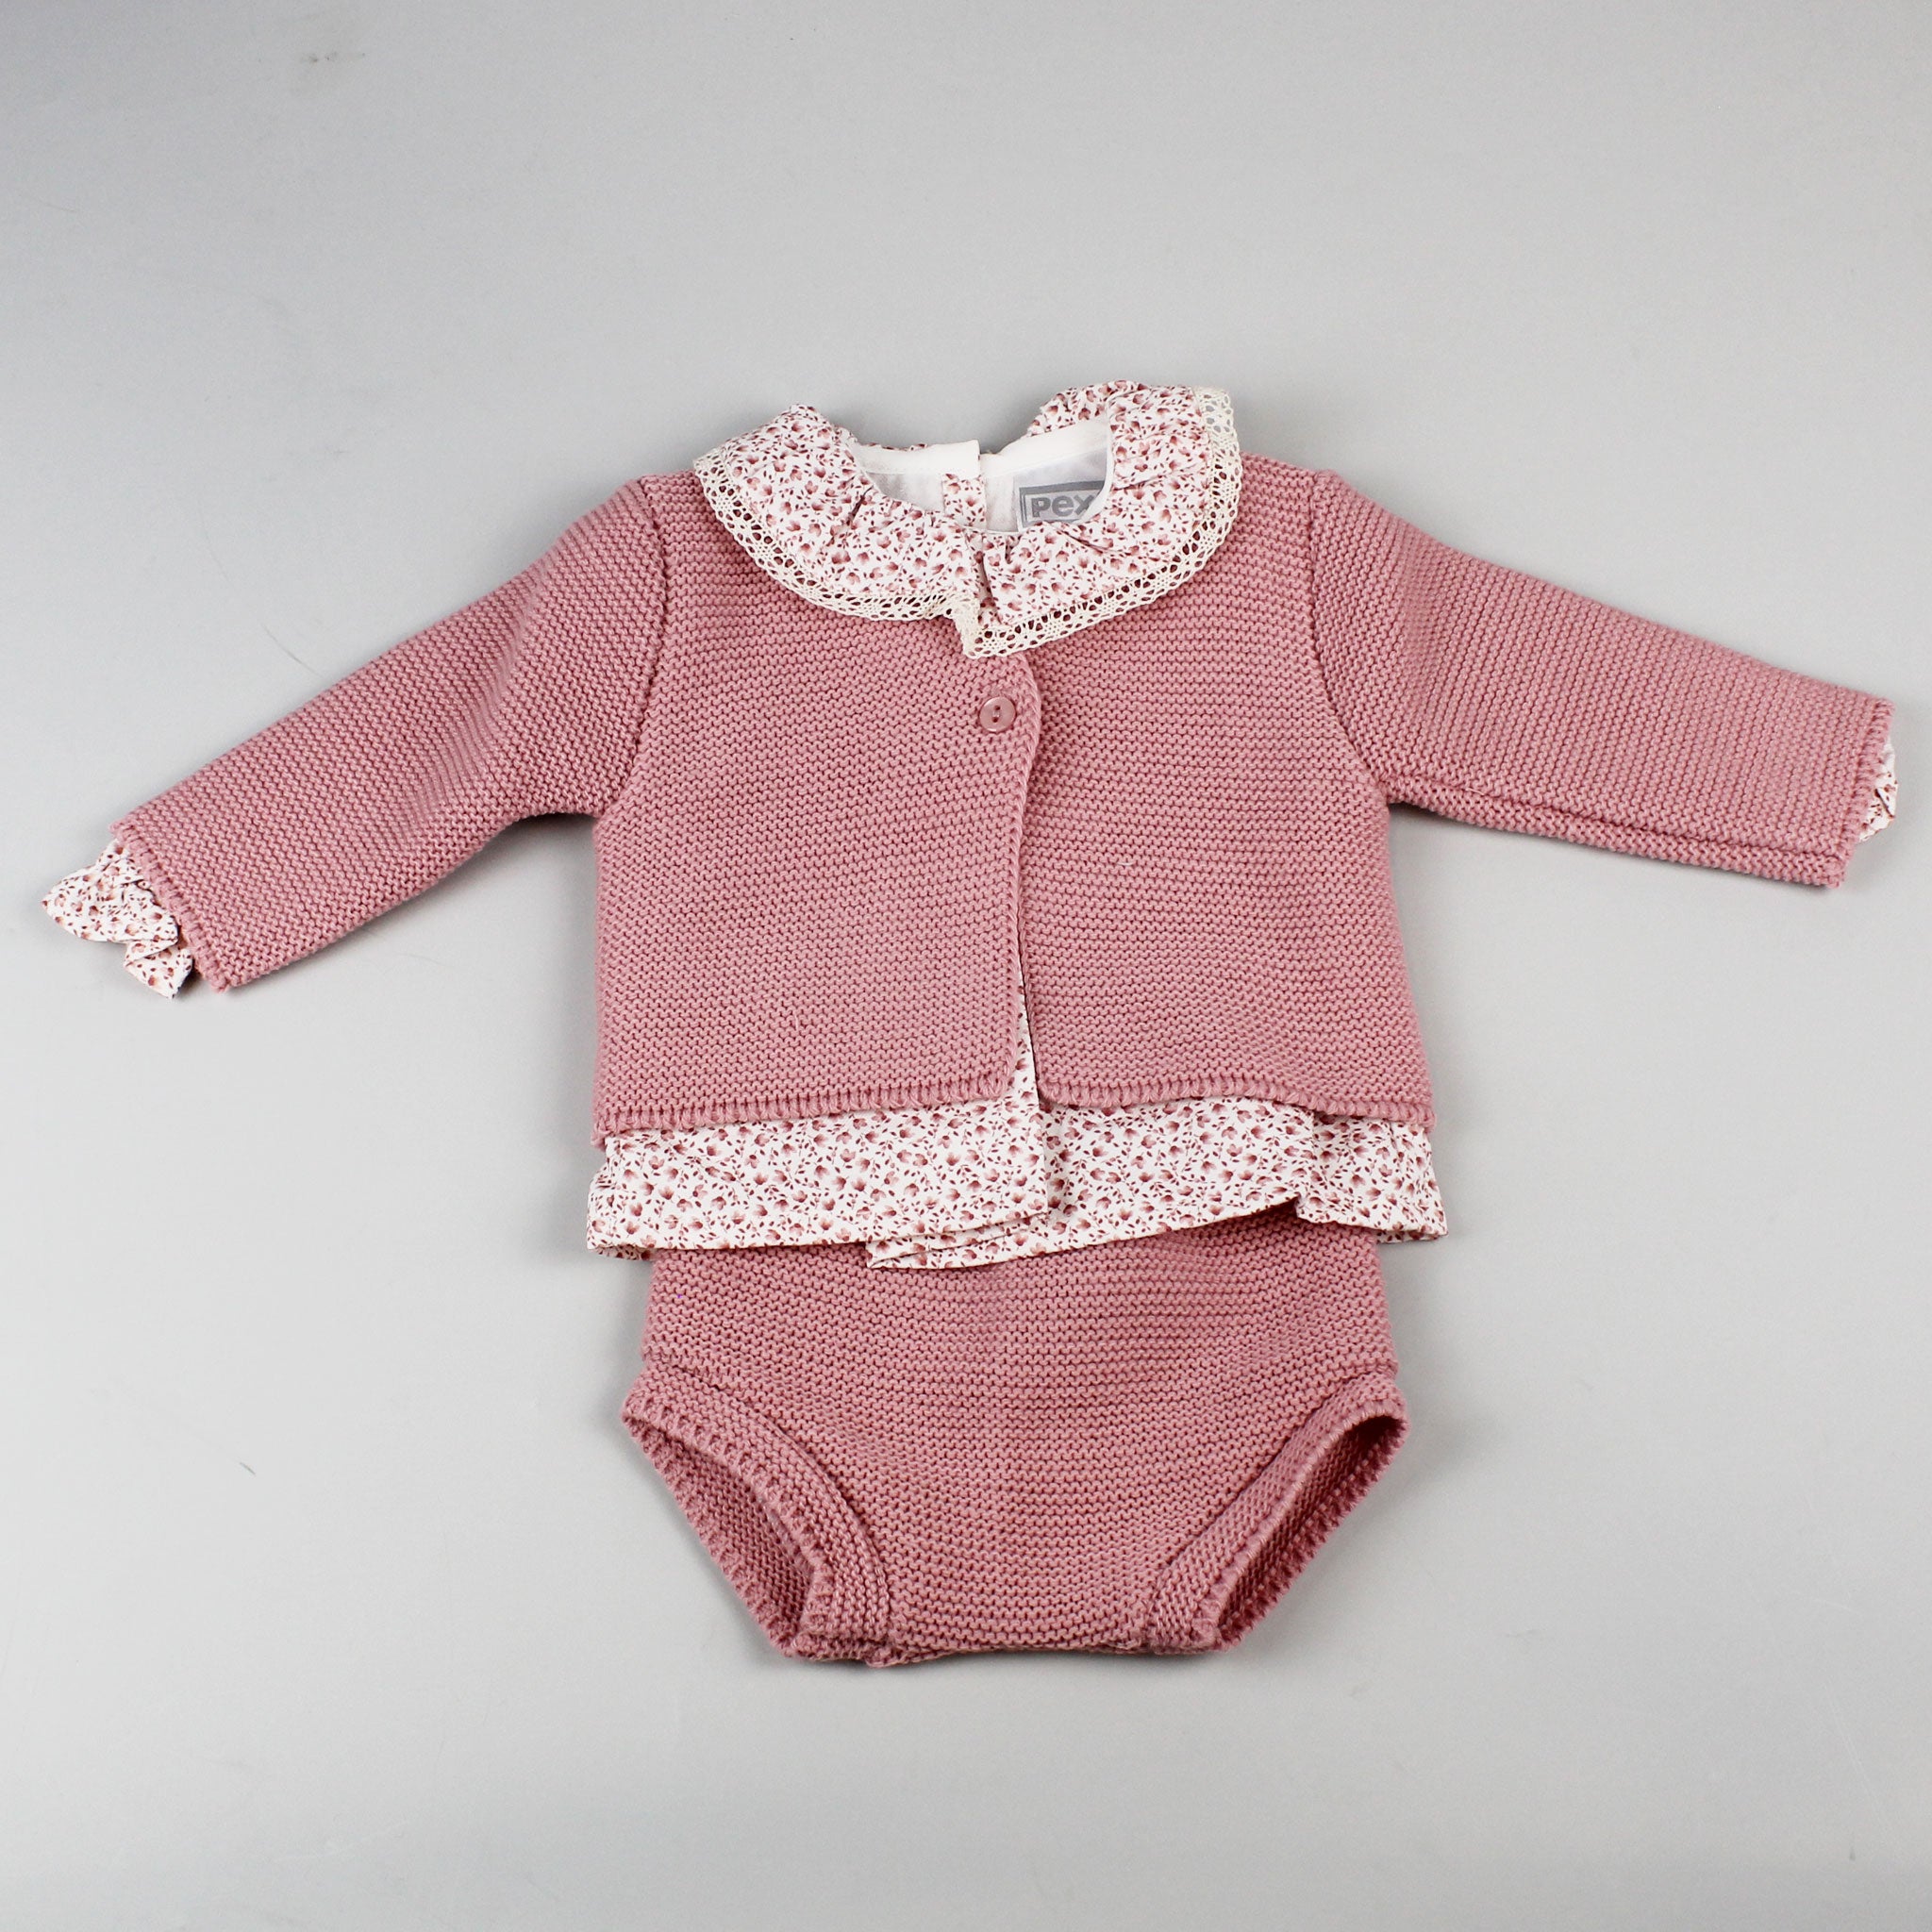 Baby Girl 3 Piece Knitted Outfit - Dusky Pink - Pex Sadie